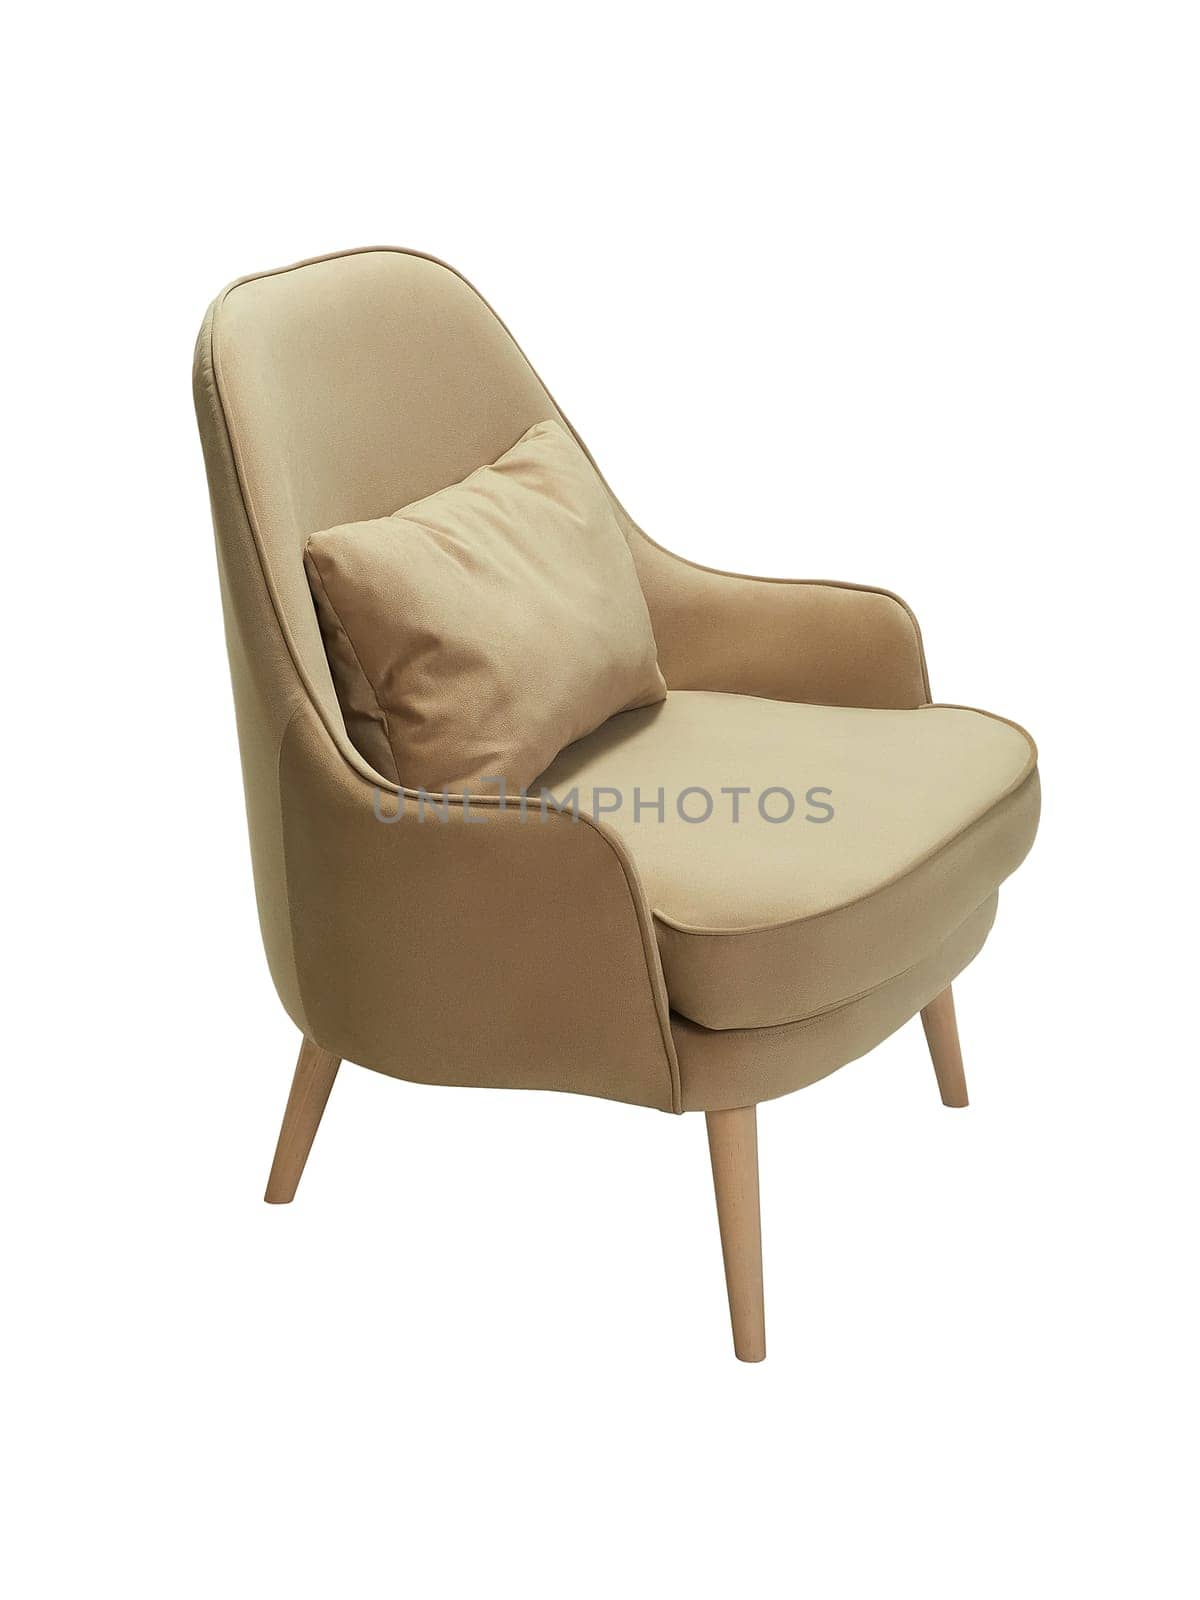 modern beige fabric armchair with wooden legs isolated on white background, side view.